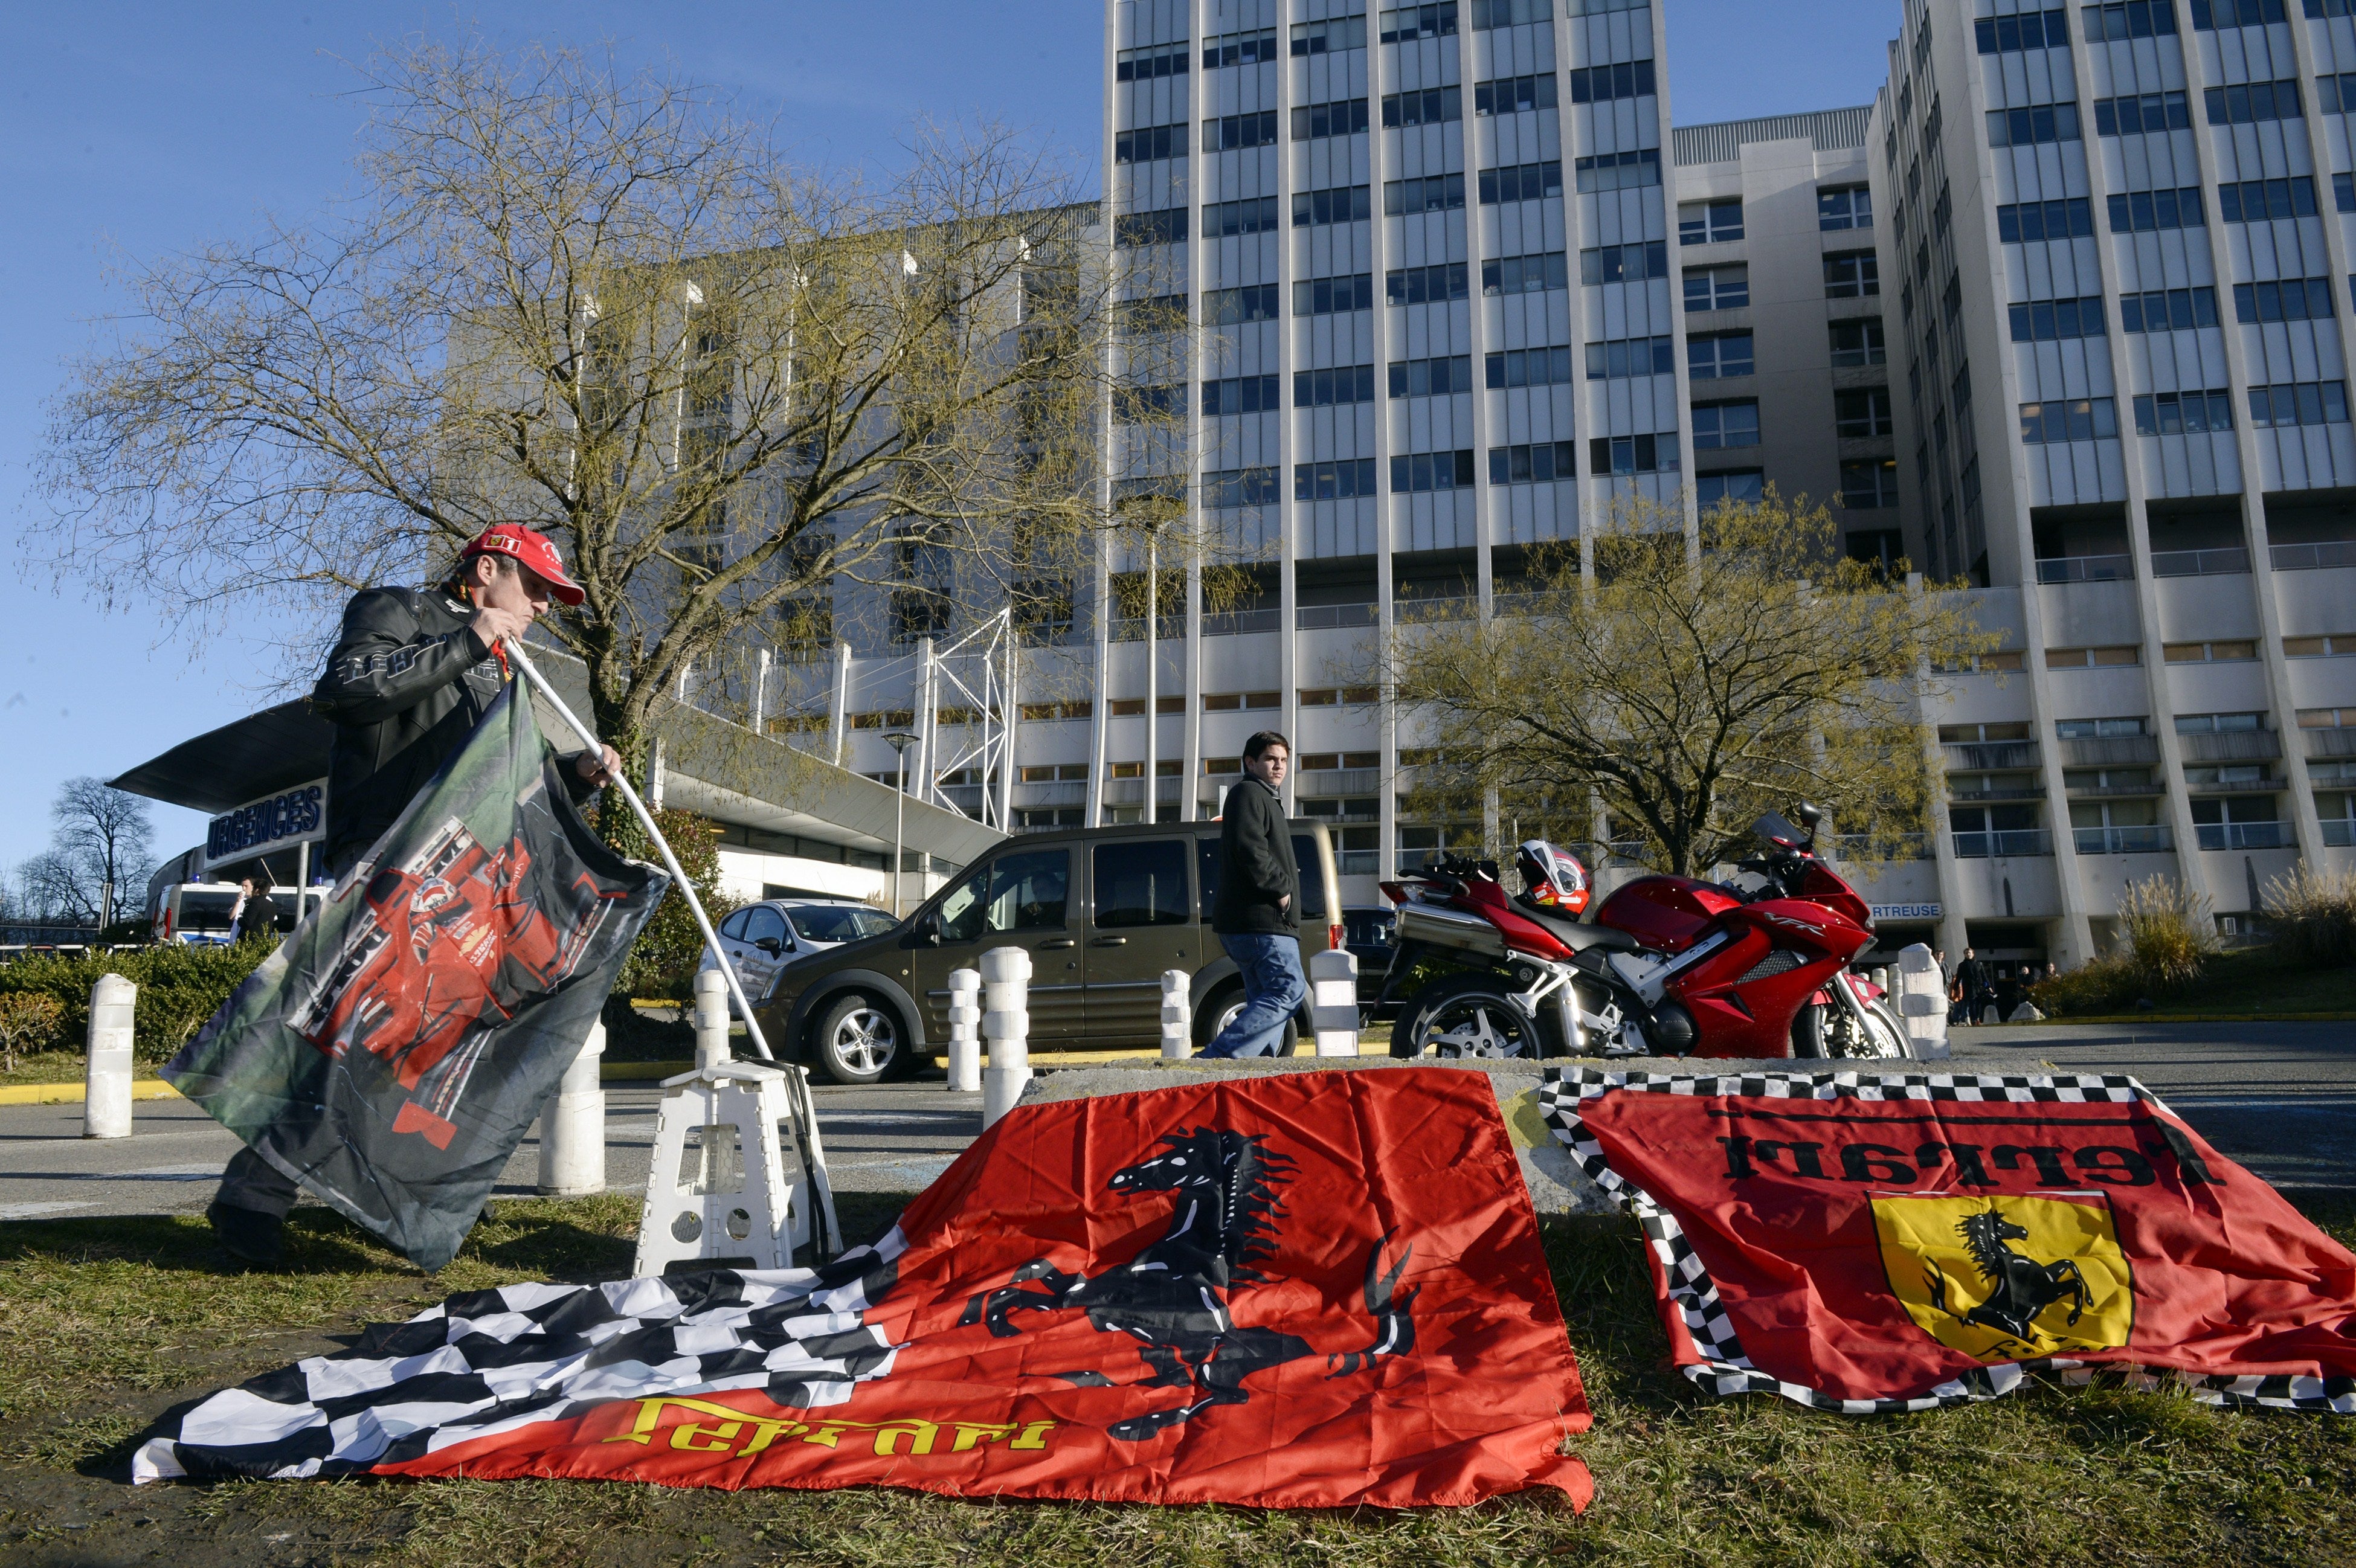 Ferrari flags were left by fans outside Grenoble University Hospital Centre following the December 2013 accident